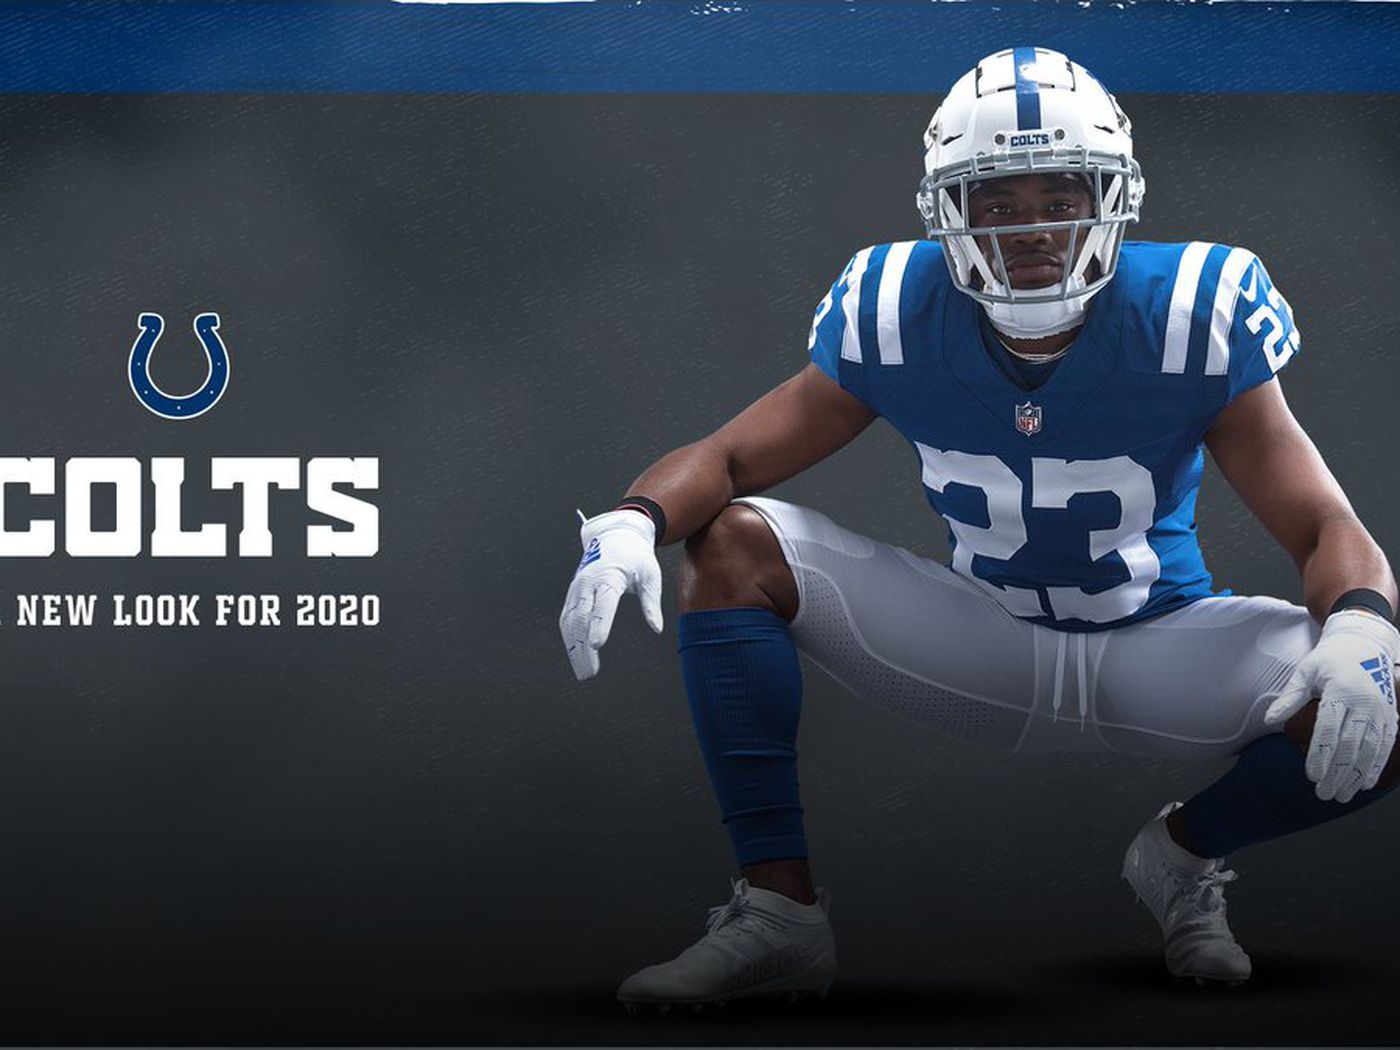 Colts release new logo, colors and uniforms